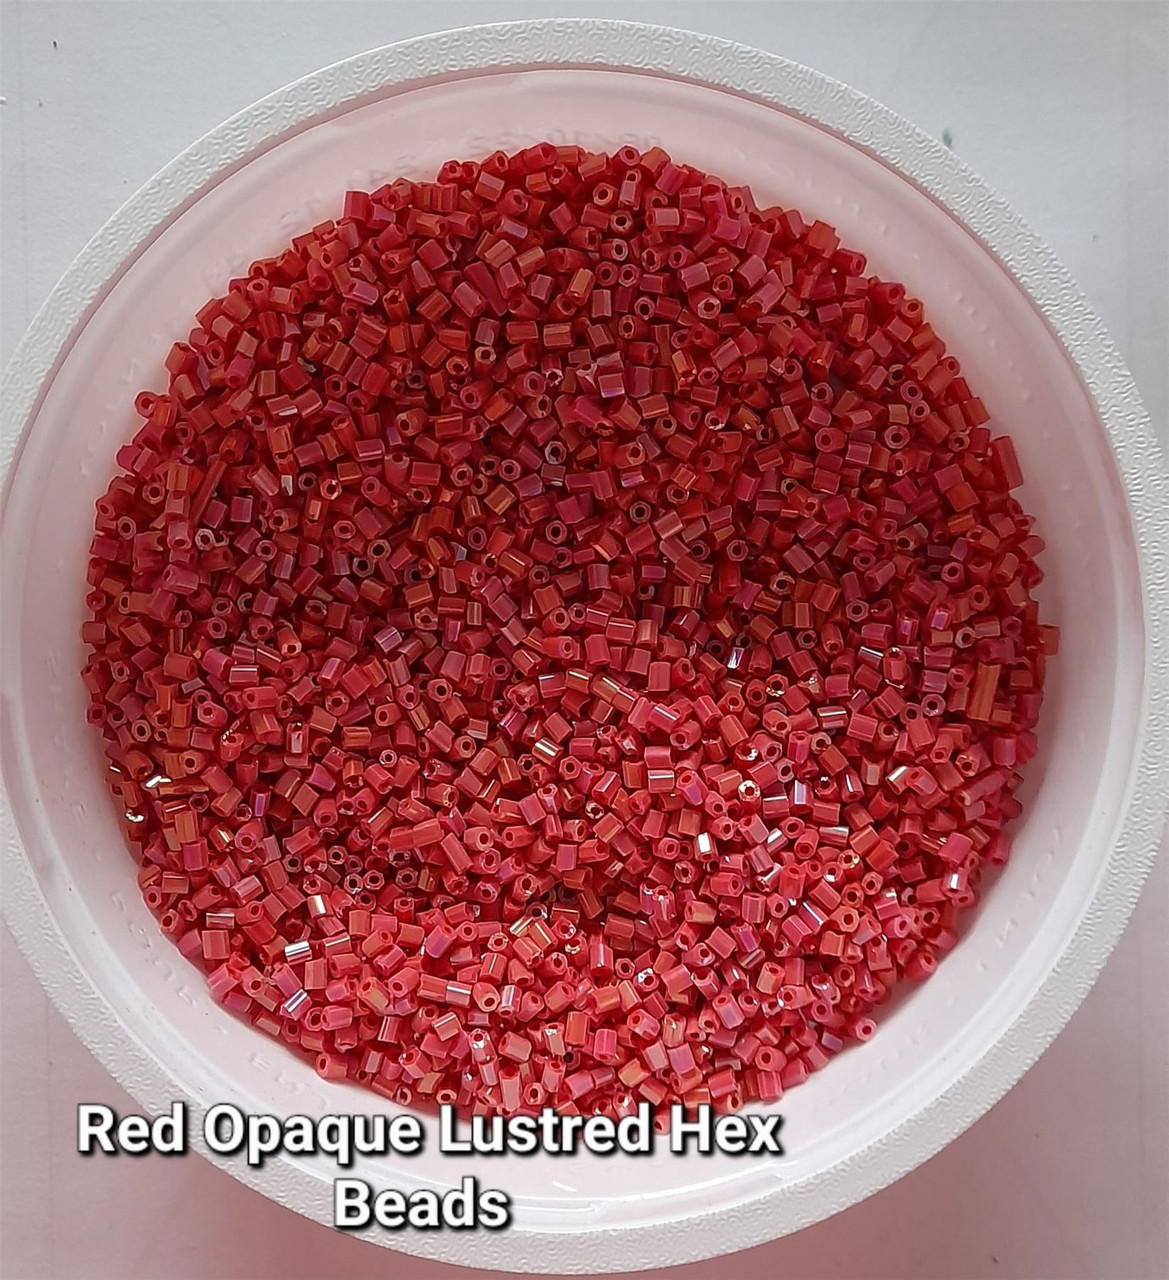 50g glass HEX seed beads - Red Opaque Lustred- size 11/0 (approx 2mm)